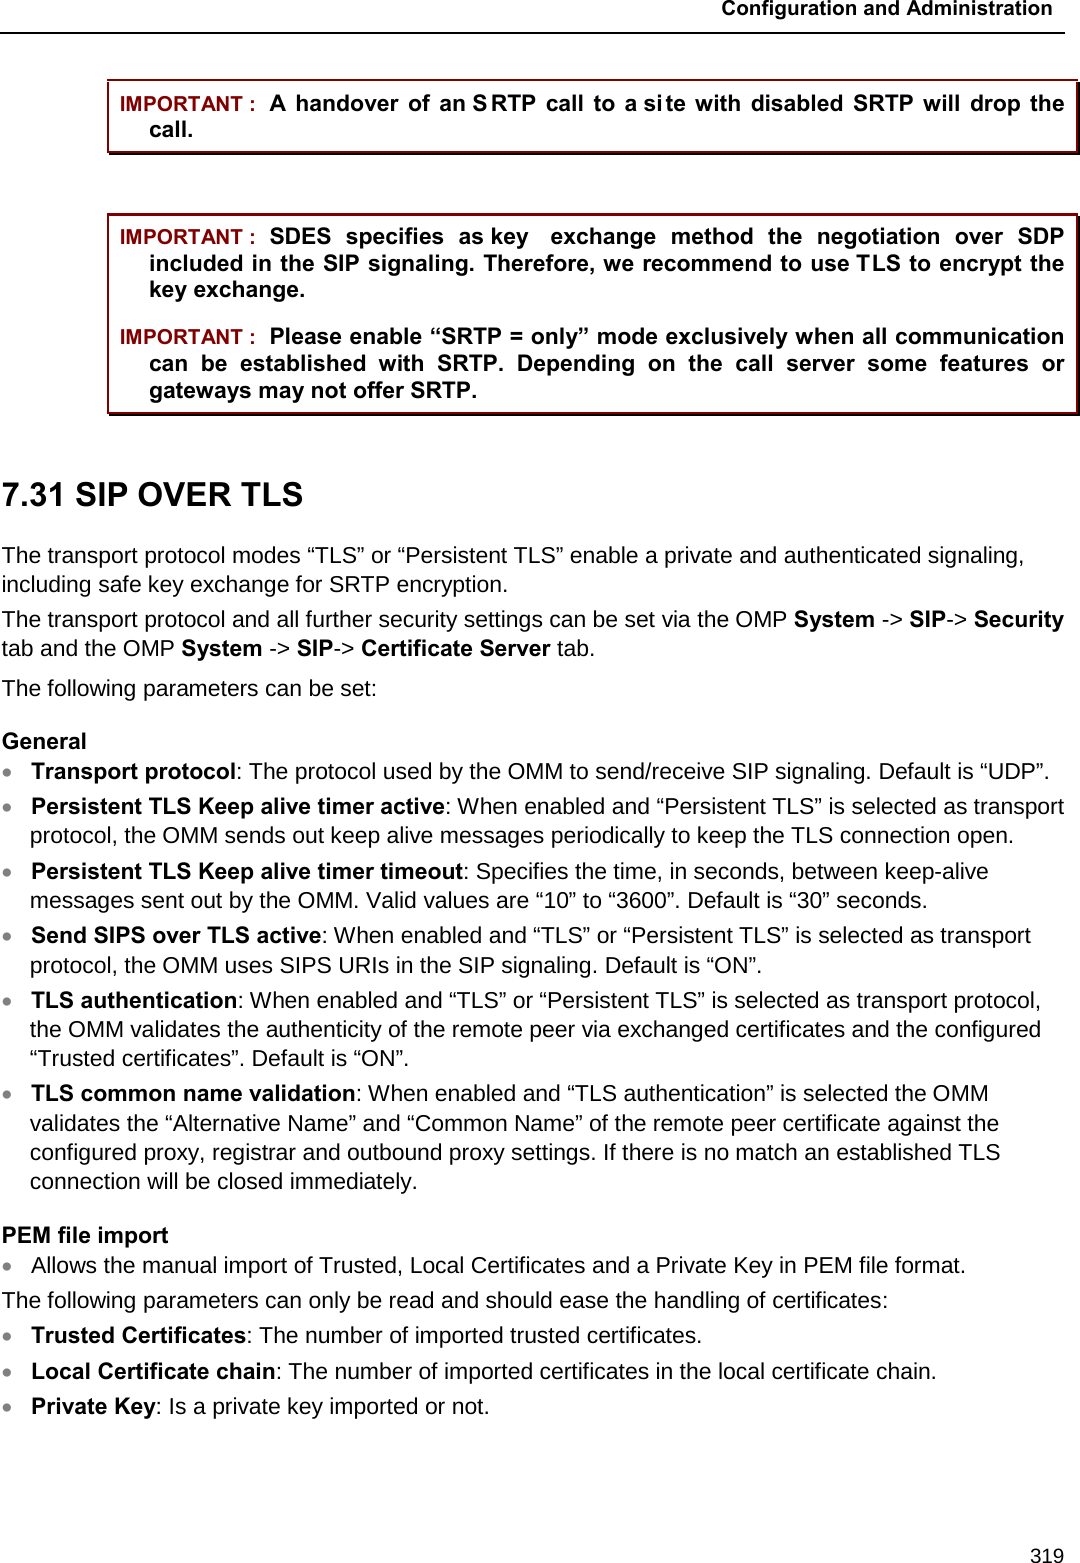  Configuration and Administration  319 IMPORTANT : A handover of an S RTP call to a site with disabled SRTP will drop the call.  IMPORTANT : SDES specifies as key  exchange method the negotiation over SDP included in the SIP signaling. Therefore, we recommend to use TLS to encrypt the key exchange. IMPORTANT : Please enable “SRTP = only” mode exclusively when all communication can be established with SRTP. Depending on the call server some features or gateways may not offer SRTP.  7.31 SIP OVER TLS  The transport protocol modes “TLS” or “Persistent TLS” enable a private and authenticated signaling, including safe key exchange for SRTP encryption. The transport protocol and all further security settings can be set via the OMP System -&gt; SIP-&gt; Security tab and the OMP System -&gt; SIP-&gt; Certificate Server tab. The following parameters can be set:  General • Transport protocol: The protocol used by the OMM to send/receive SIP signaling. Default is “UDP”. • Persistent TLS Keep alive timer active: When enabled and “Persistent TLS” is selected as transport protocol, the OMM sends out keep alive messages periodically to keep the TLS connection open. • Persistent TLS Keep alive timer timeout: Specifies the time, in seconds, between keep-alive messages sent out by the OMM. Valid values are “10” to “3600”. Default is “30” seconds. • Send SIPS over TLS active: When enabled and “TLS” or “Persistent TLS” is selected as transport protocol, the OMM uses SIPS URIs in the SIP signaling. Default is “ON”.  • TLS authentication: When enabled and “TLS” or “Persistent TLS” is selected as transport protocol, the OMM validates the authenticity of the remote peer via exchanged certificates and the configured “Trusted certificates”. Default is “ON”. • TLS common name validation: When enabled and “TLS authentication” is selected the OMM validates the “Alternative Name” and “Common Name” of the remote peer certificate against the configured proxy, registrar and outbound proxy settings. If there is no match an established TLS connection will be closed immediately. PEM file import • Allows the manual import of Trusted, Local Certificates and a Private Key in PEM file format. The following parameters can only be read and should ease the handling of certificates: • Trusted Certificates: The number of imported trusted certificates. • Local Certificate chain: The number of imported certificates in the local certificate chain. • Private Key: Is a private key imported or not. 